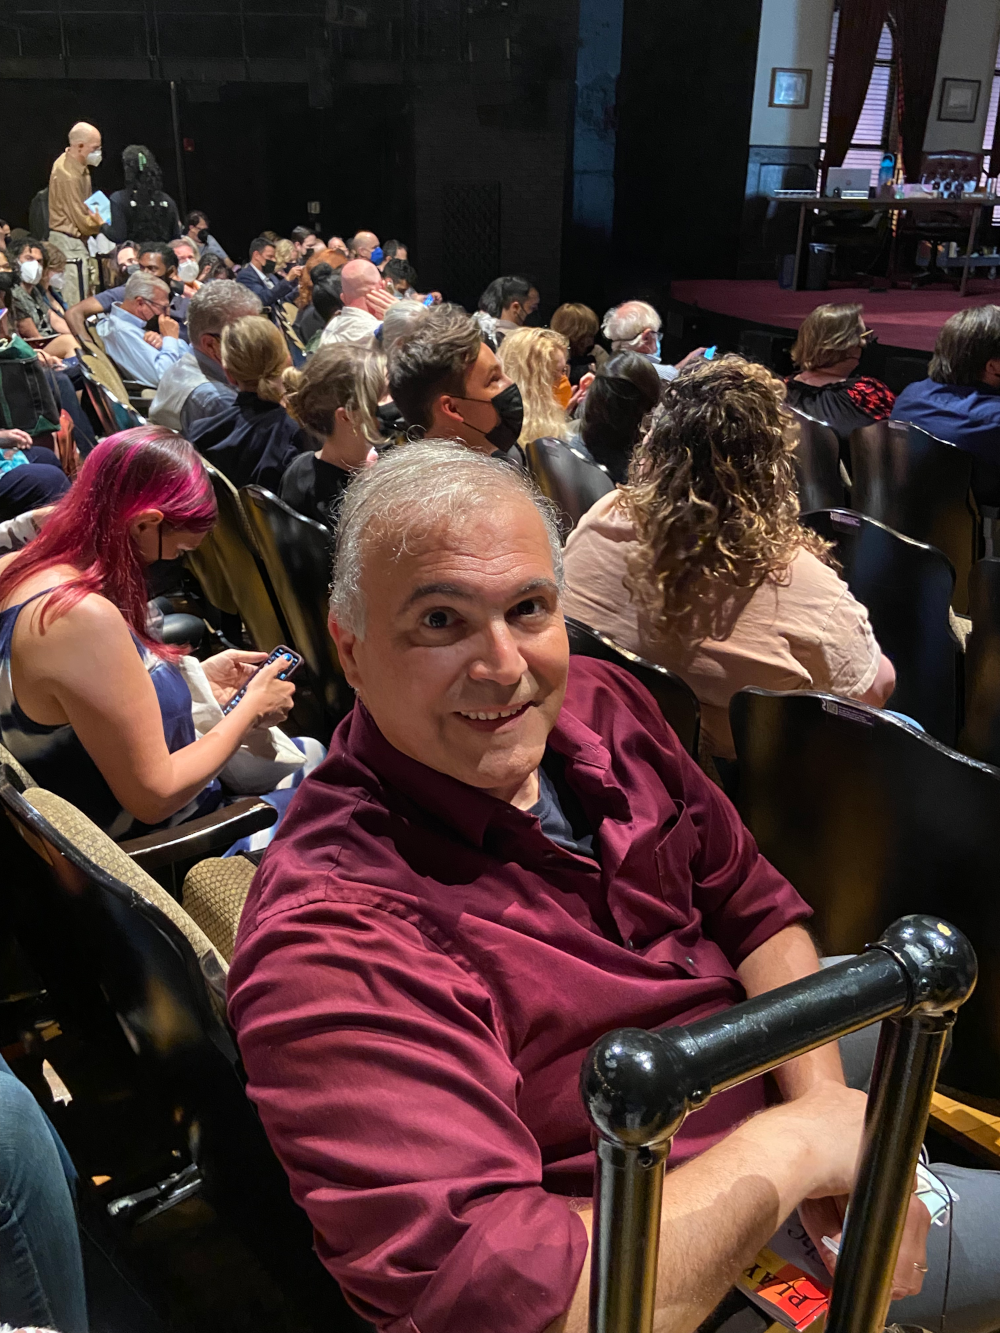 A color photo of author Robert Viagas sitting in a theater audience.